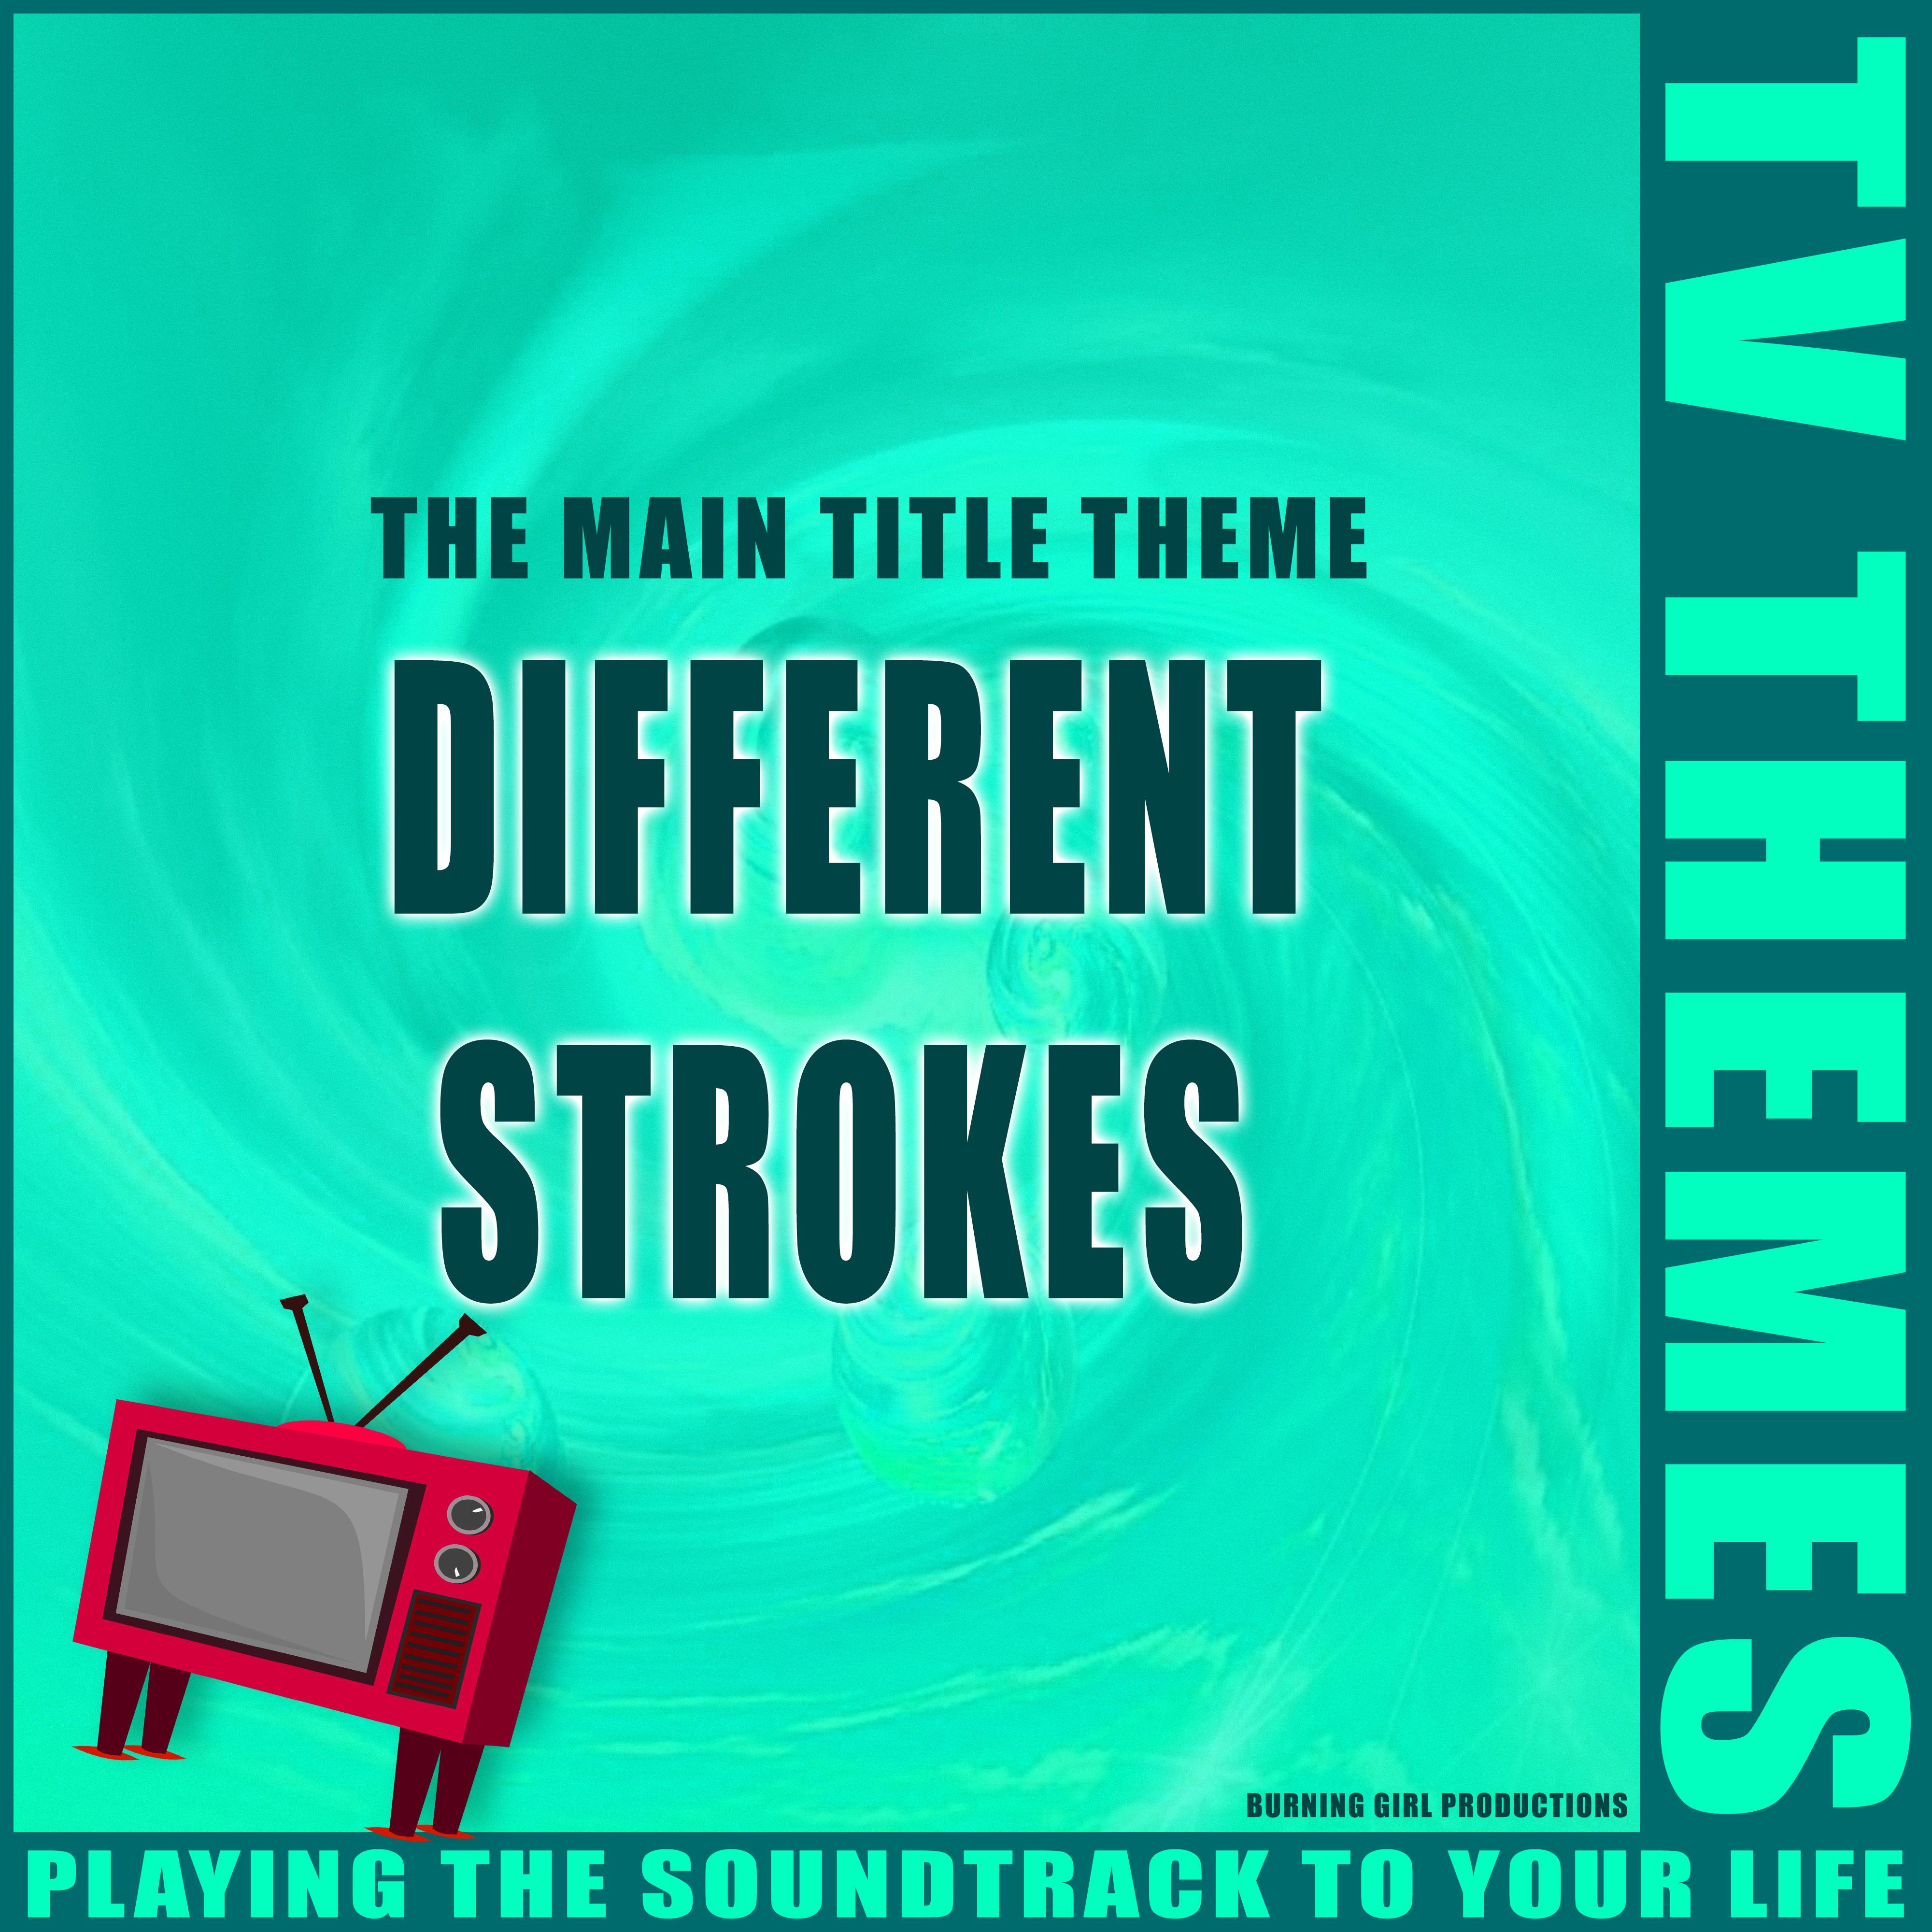 Different Strokes - The Main Title Theme